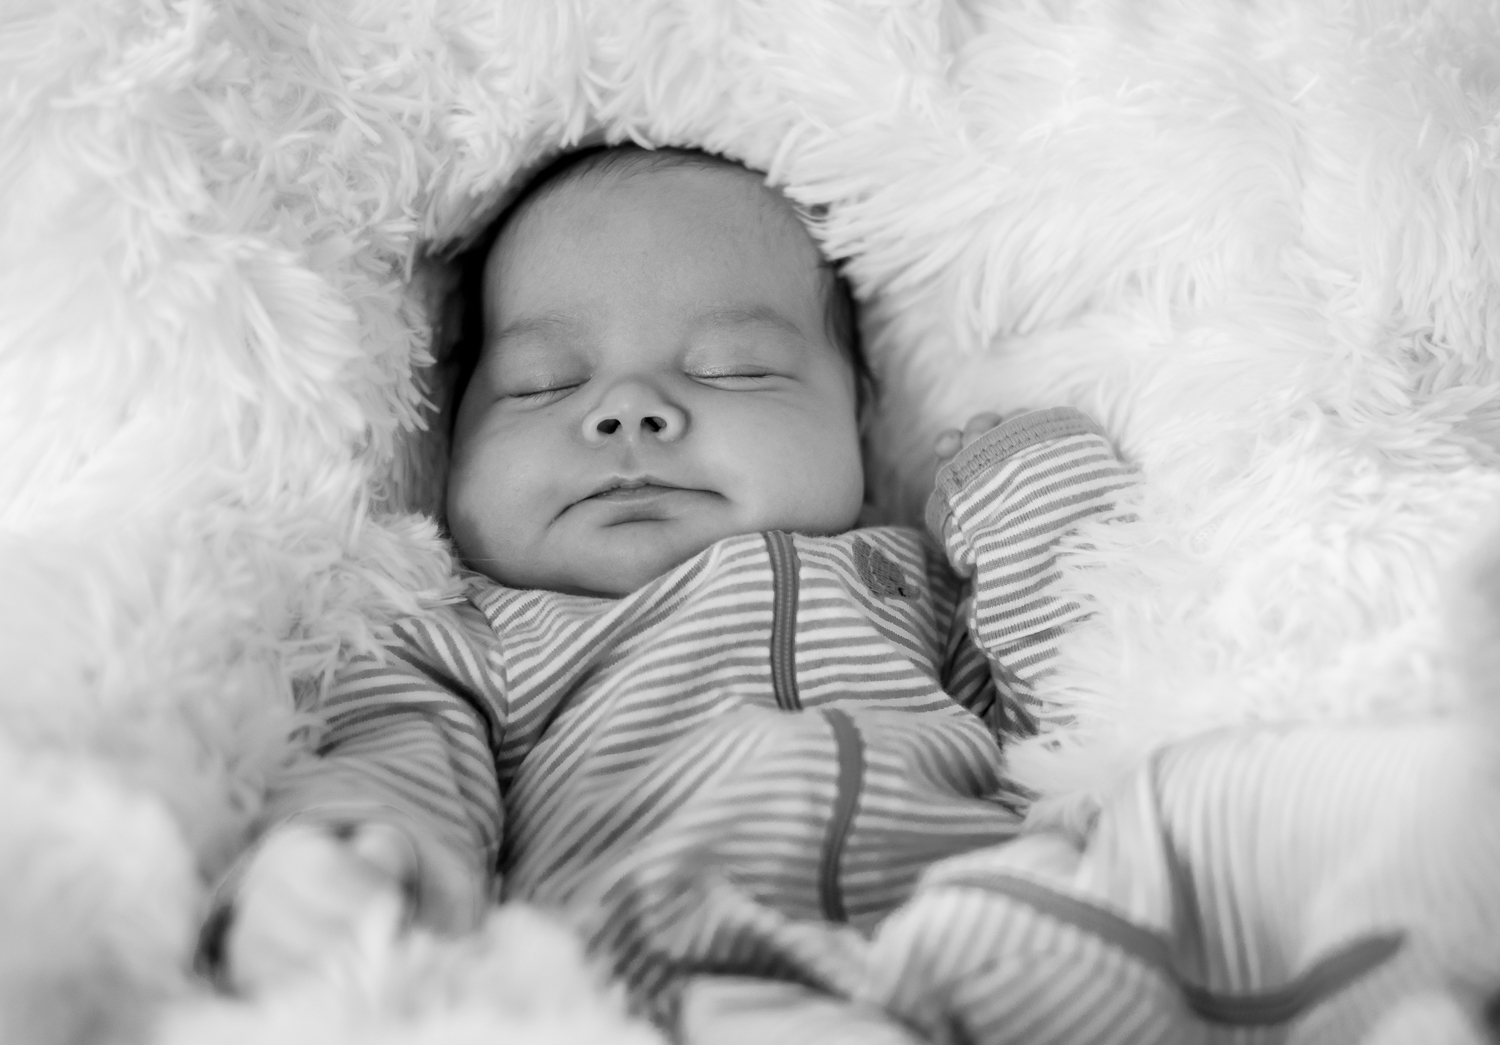 Black and white family photos. Infant sleeping on a thick puffy blanket.